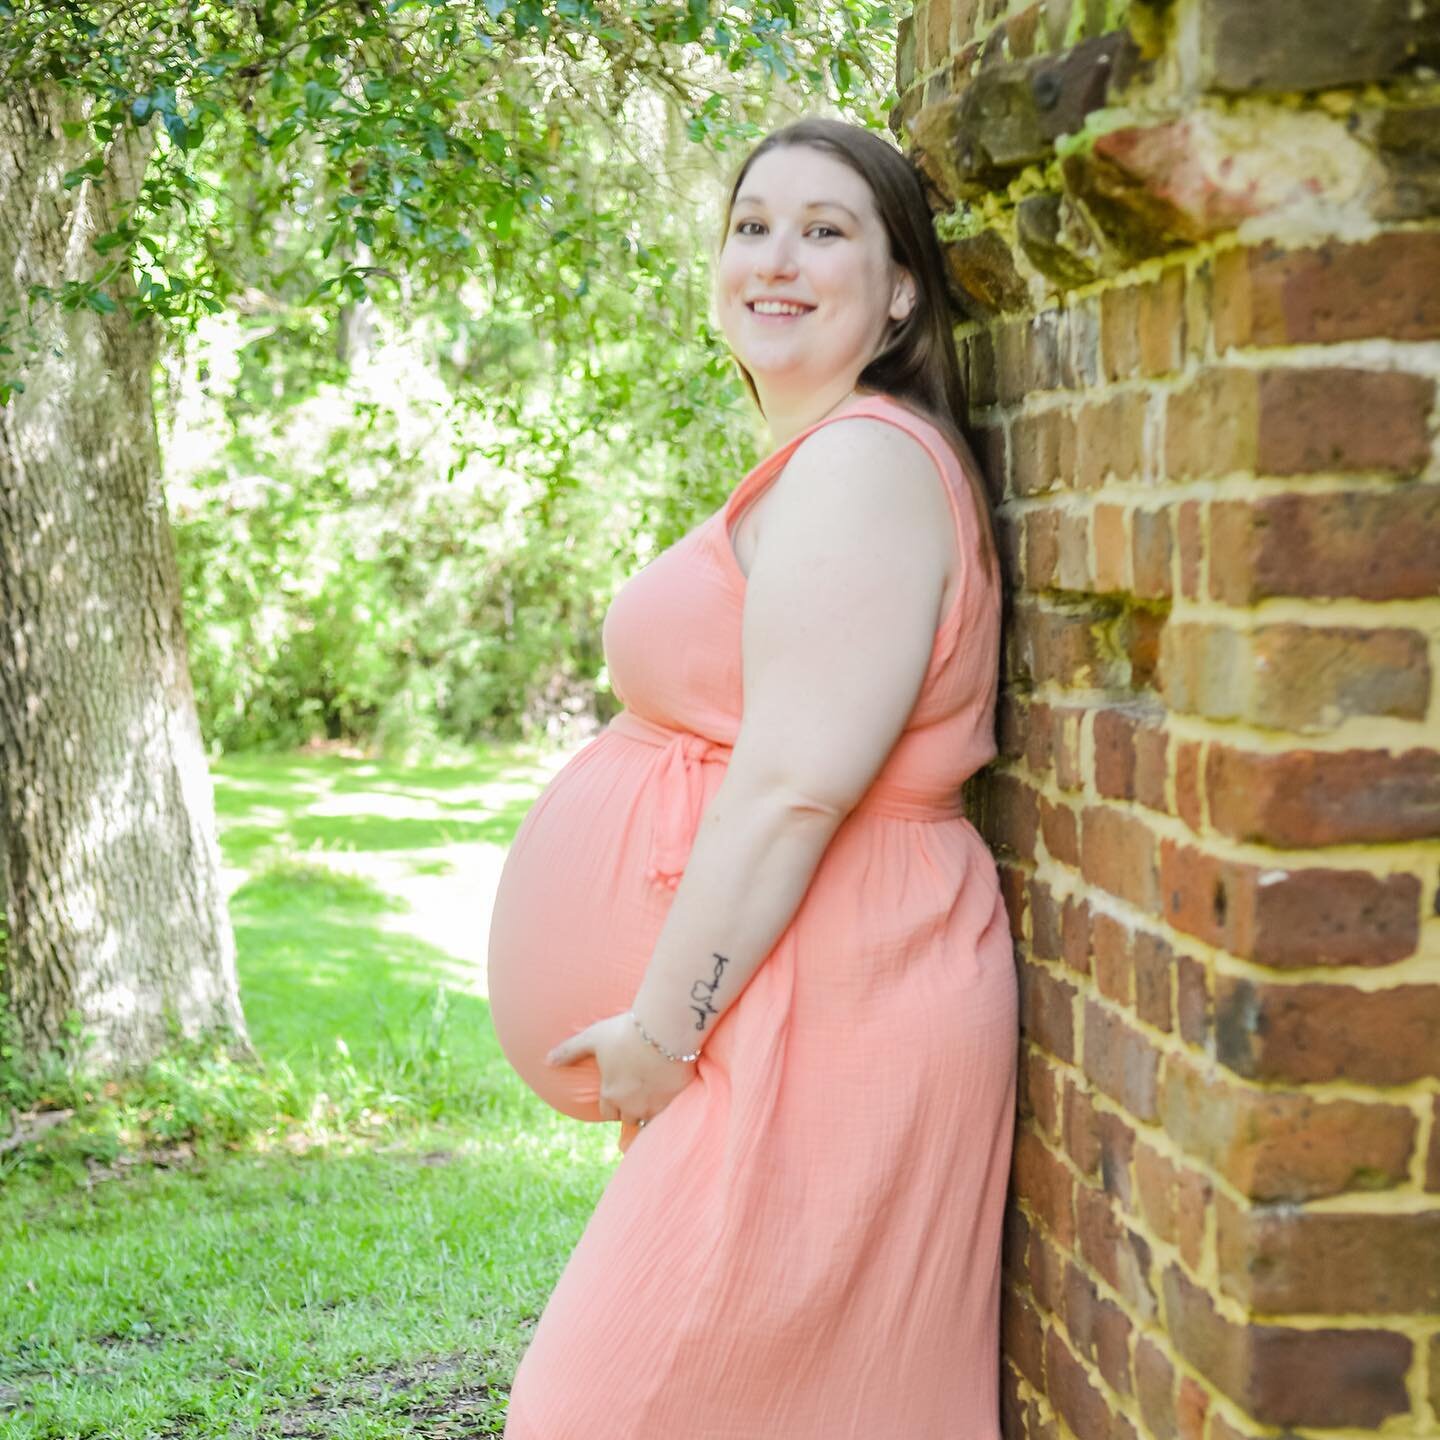 Please pray for my sweet clients, friends/extended family. Brittany tested positive for COVID-19 as she was giving birth at 34 weeks to their twin girls. The twins have both tested positive as well. After a few surgeries for complications, Brittany i